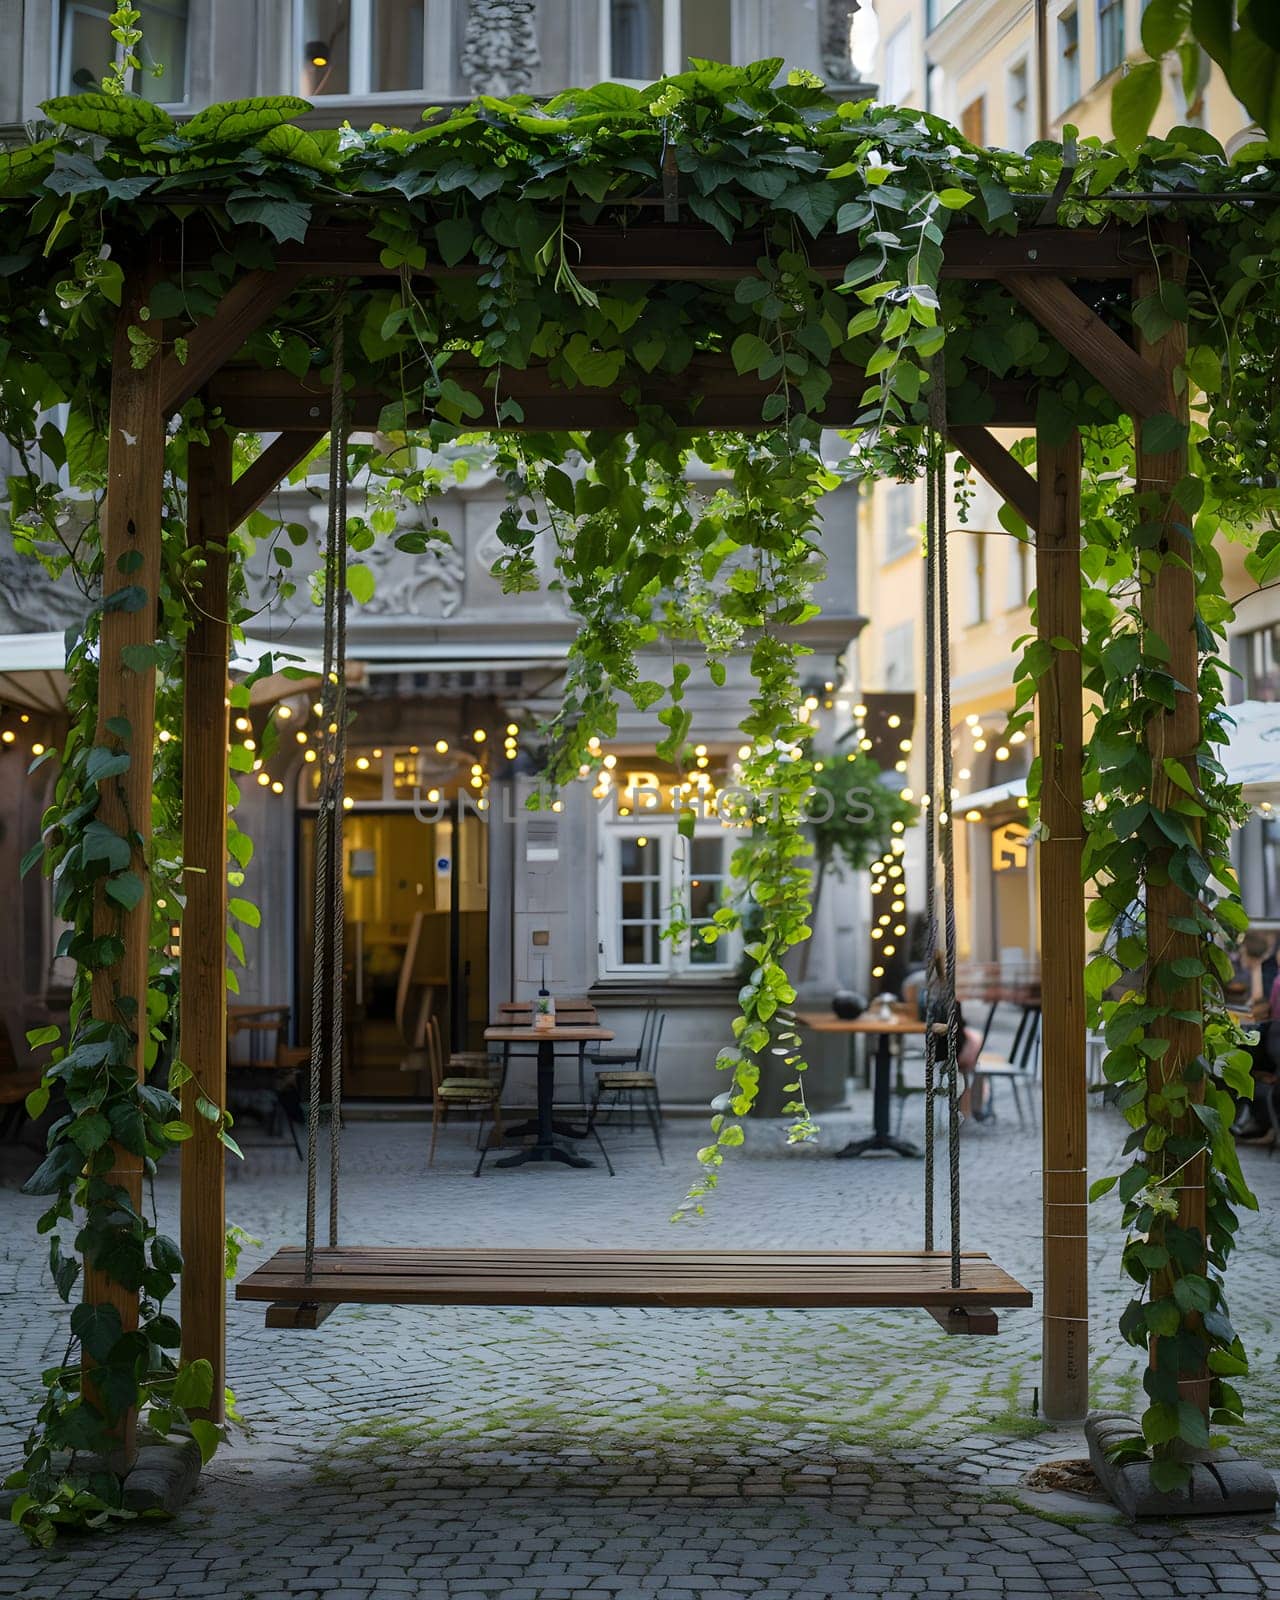 A wooden swing outside a building with ivy hanging from it, adding a touch of nature to the urban design. The facade is complemented by shades of green from the ivy